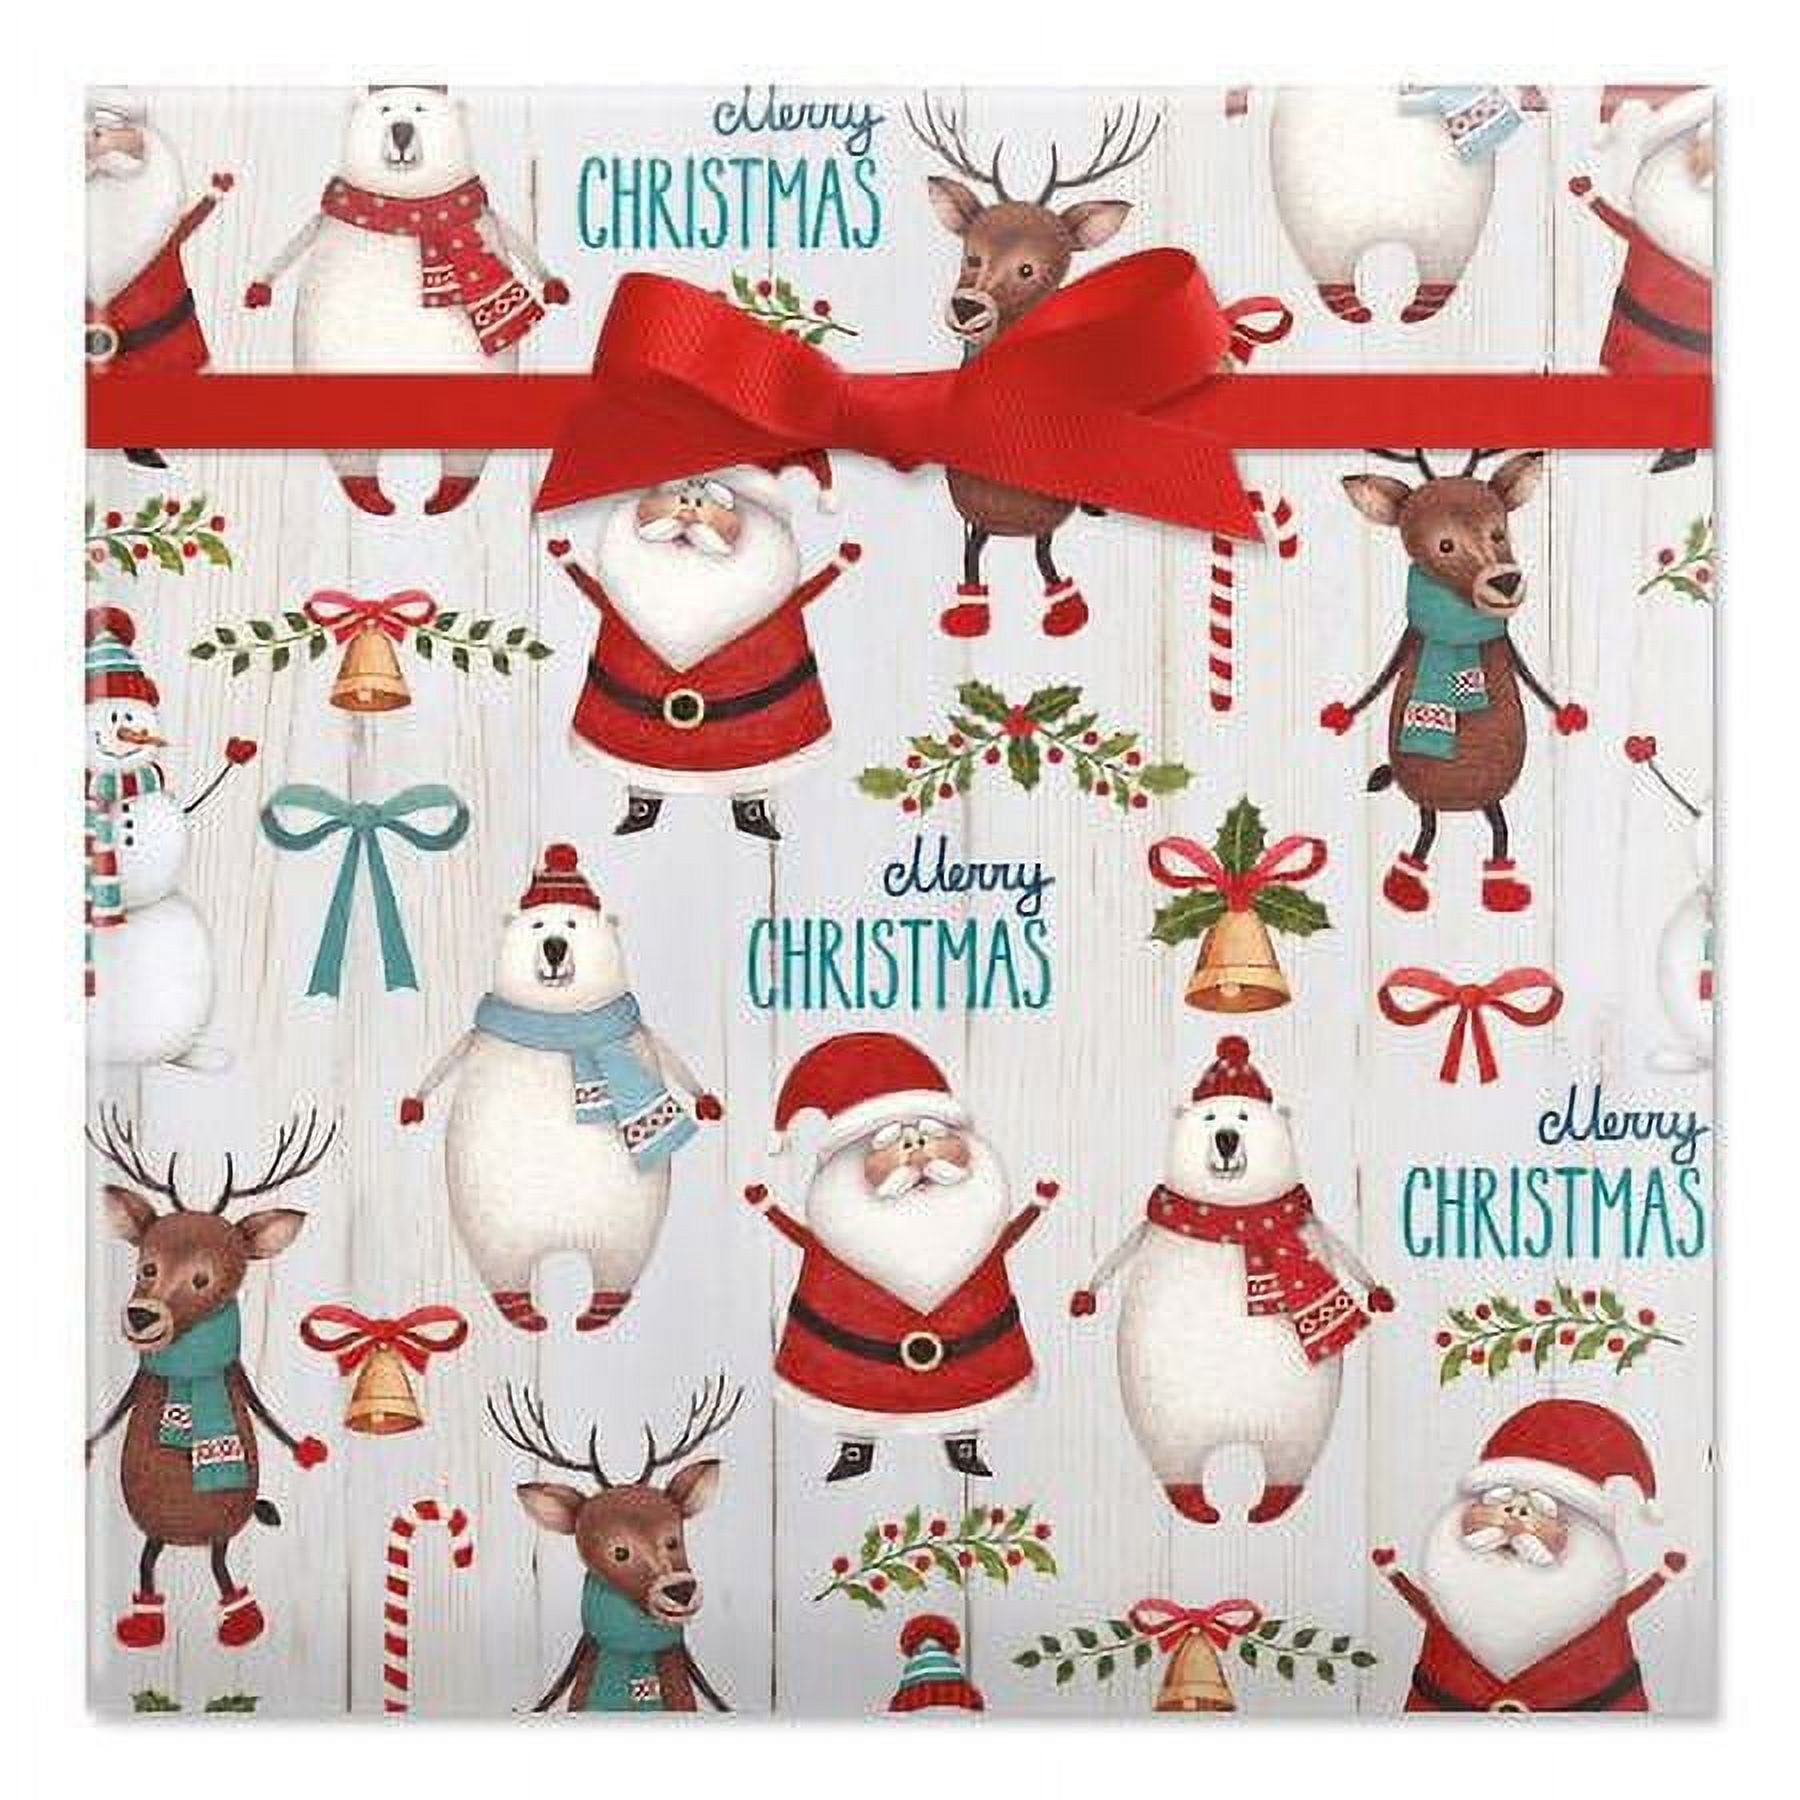 Current Sweet Treats Gingerbread Man Christmas Rolled Wrapping Paper -  Premium Jumbo 23-Inch x 32-Foot Gift Wrap Roll, 61 Square Feet Total